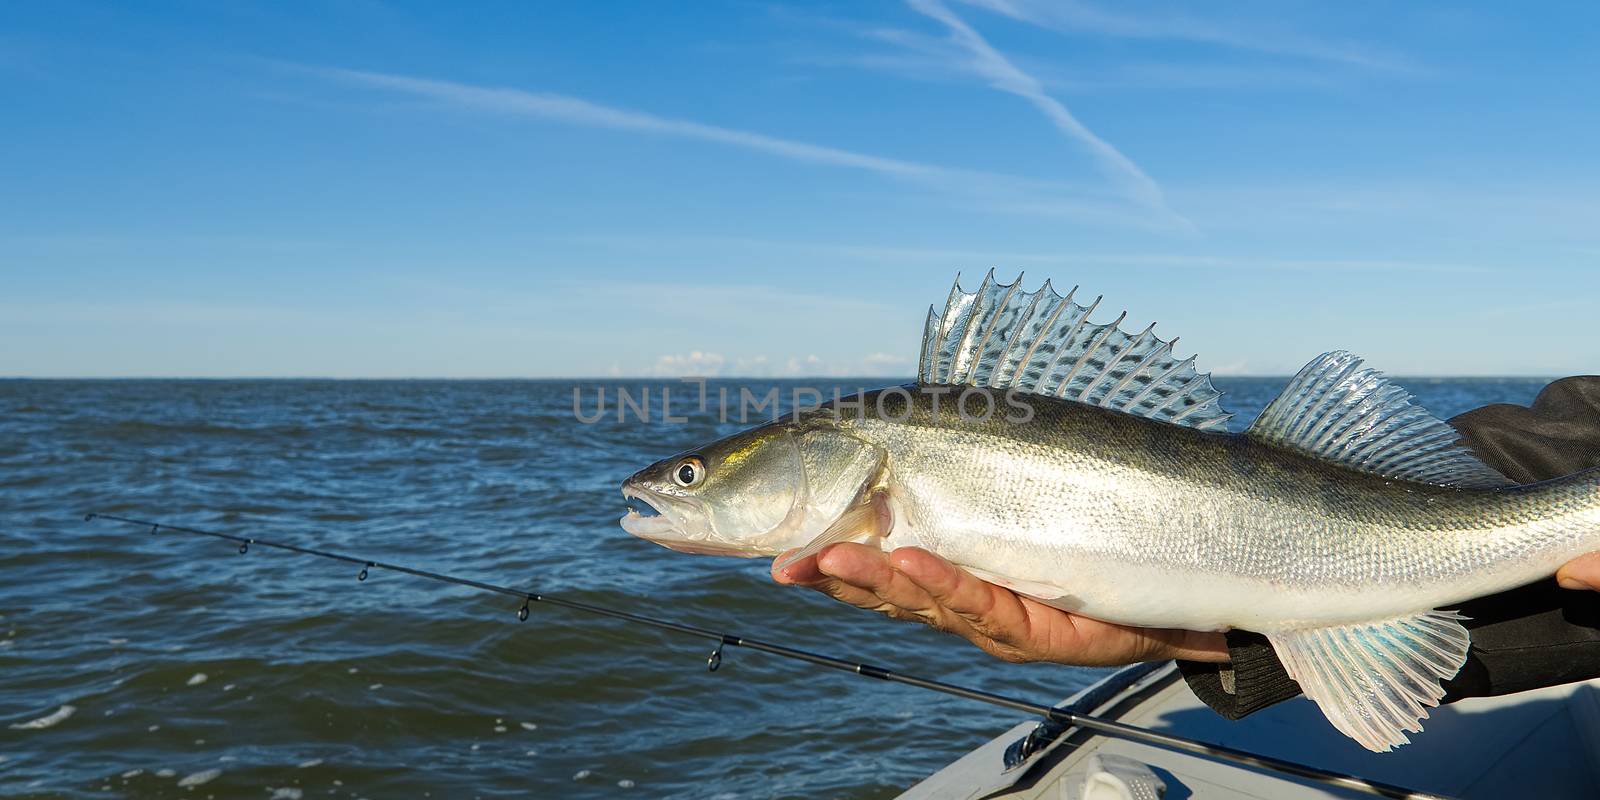 Fisherman holds a caught zander or pike perch in hands against the background of the Baltic sea. Fishing catch and release concept. Zander on freedom